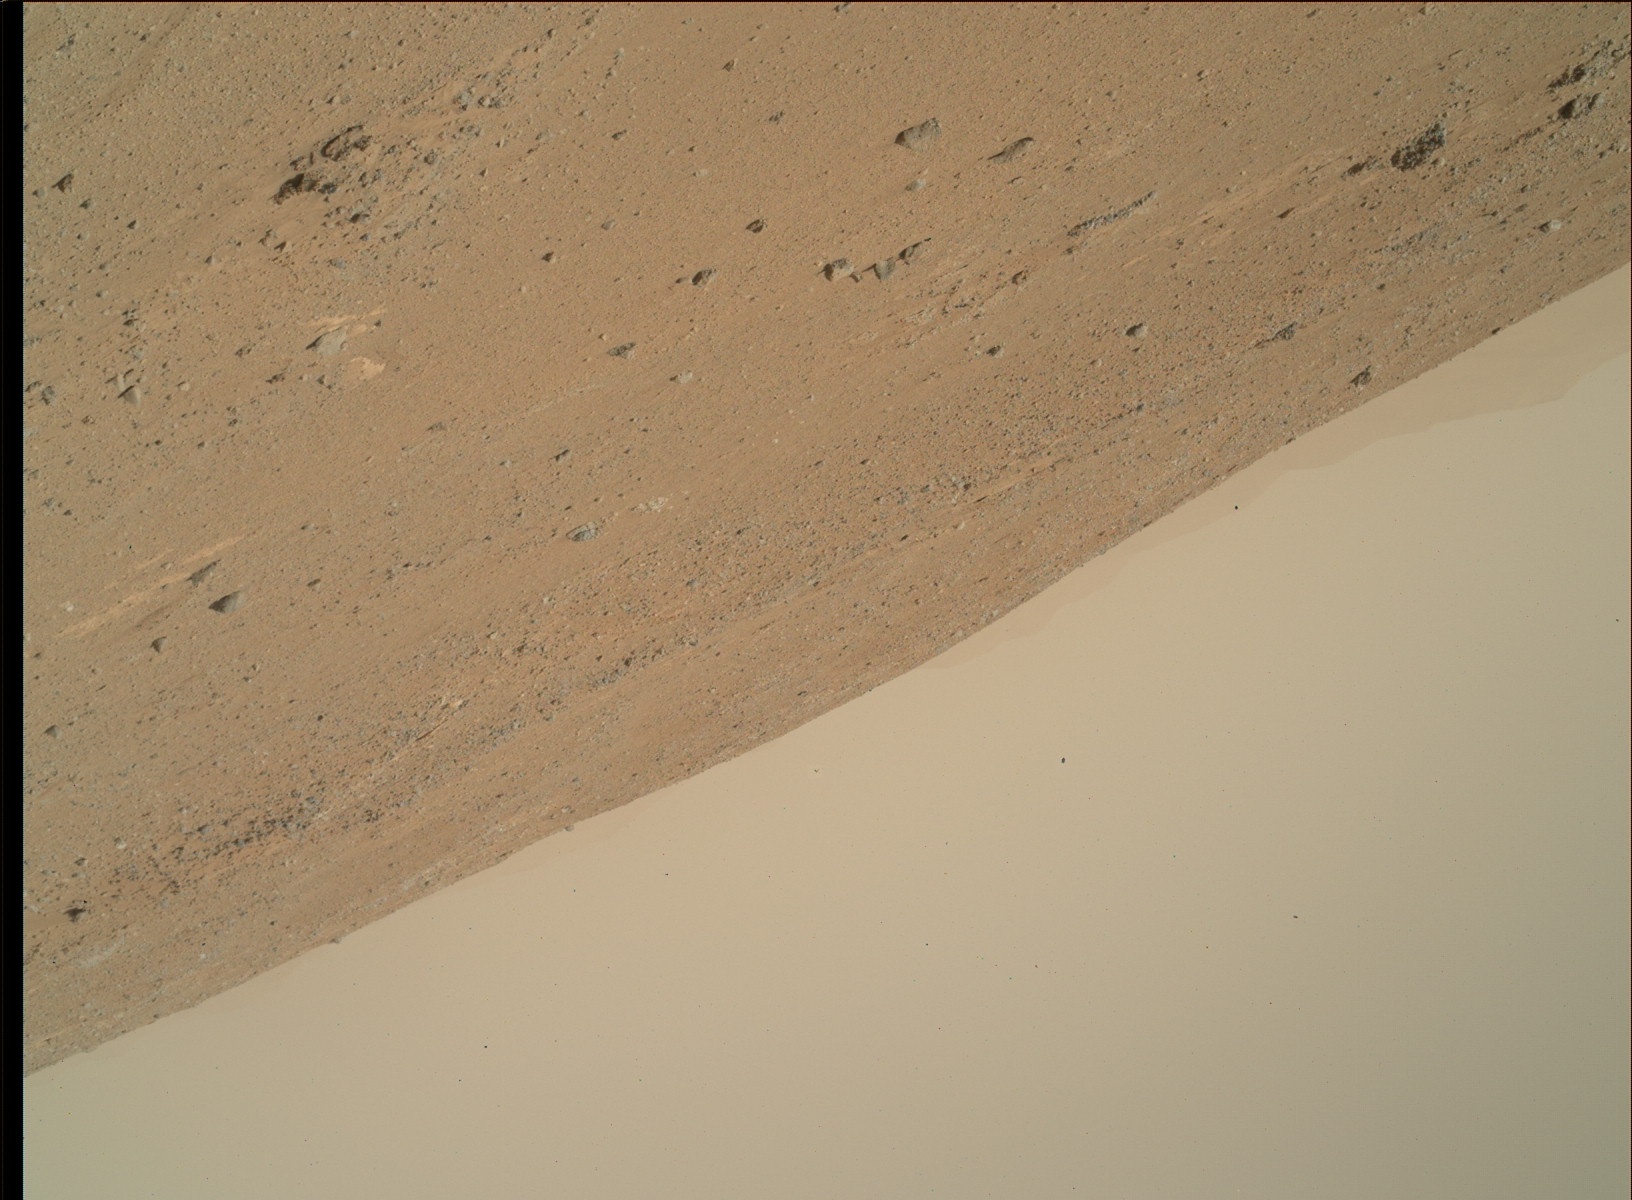 Nasa's Mars rover Curiosity acquired this image using its Mars Hand Lens Imager (MAHLI) on Sol 390